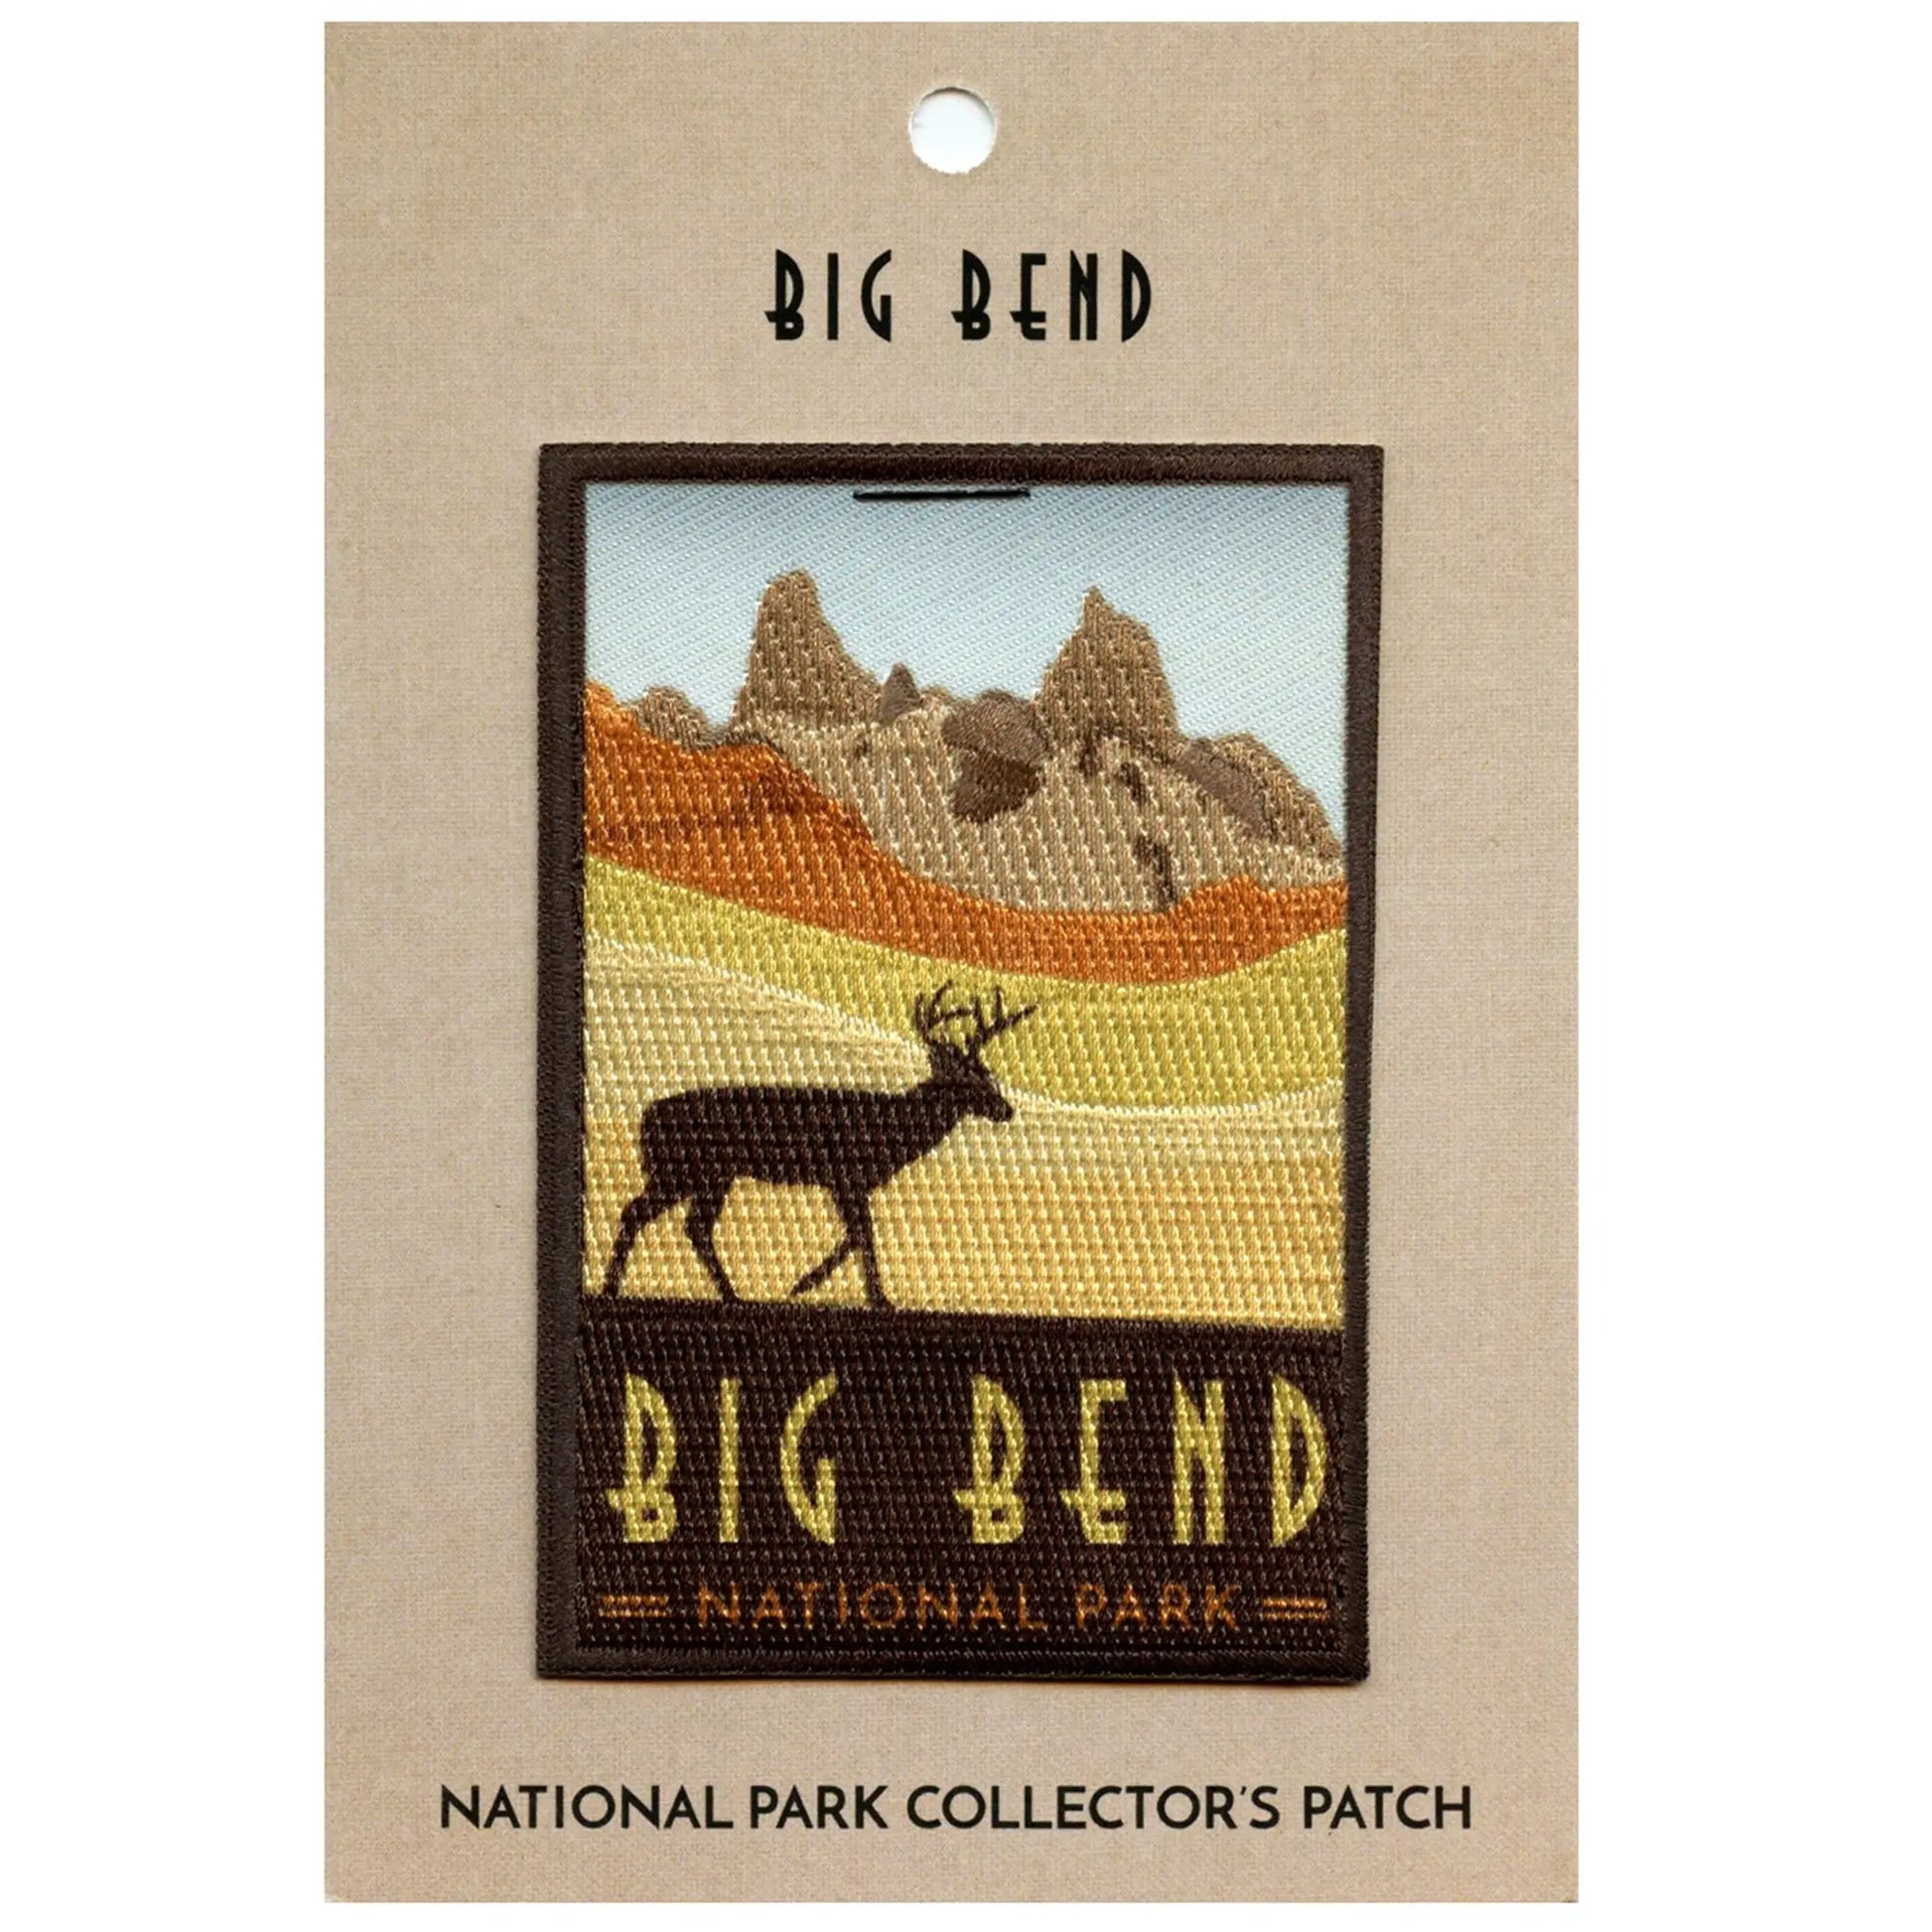 Big Bend National Park Patch Chihuahuan Desert Travel Embroidered Iron On